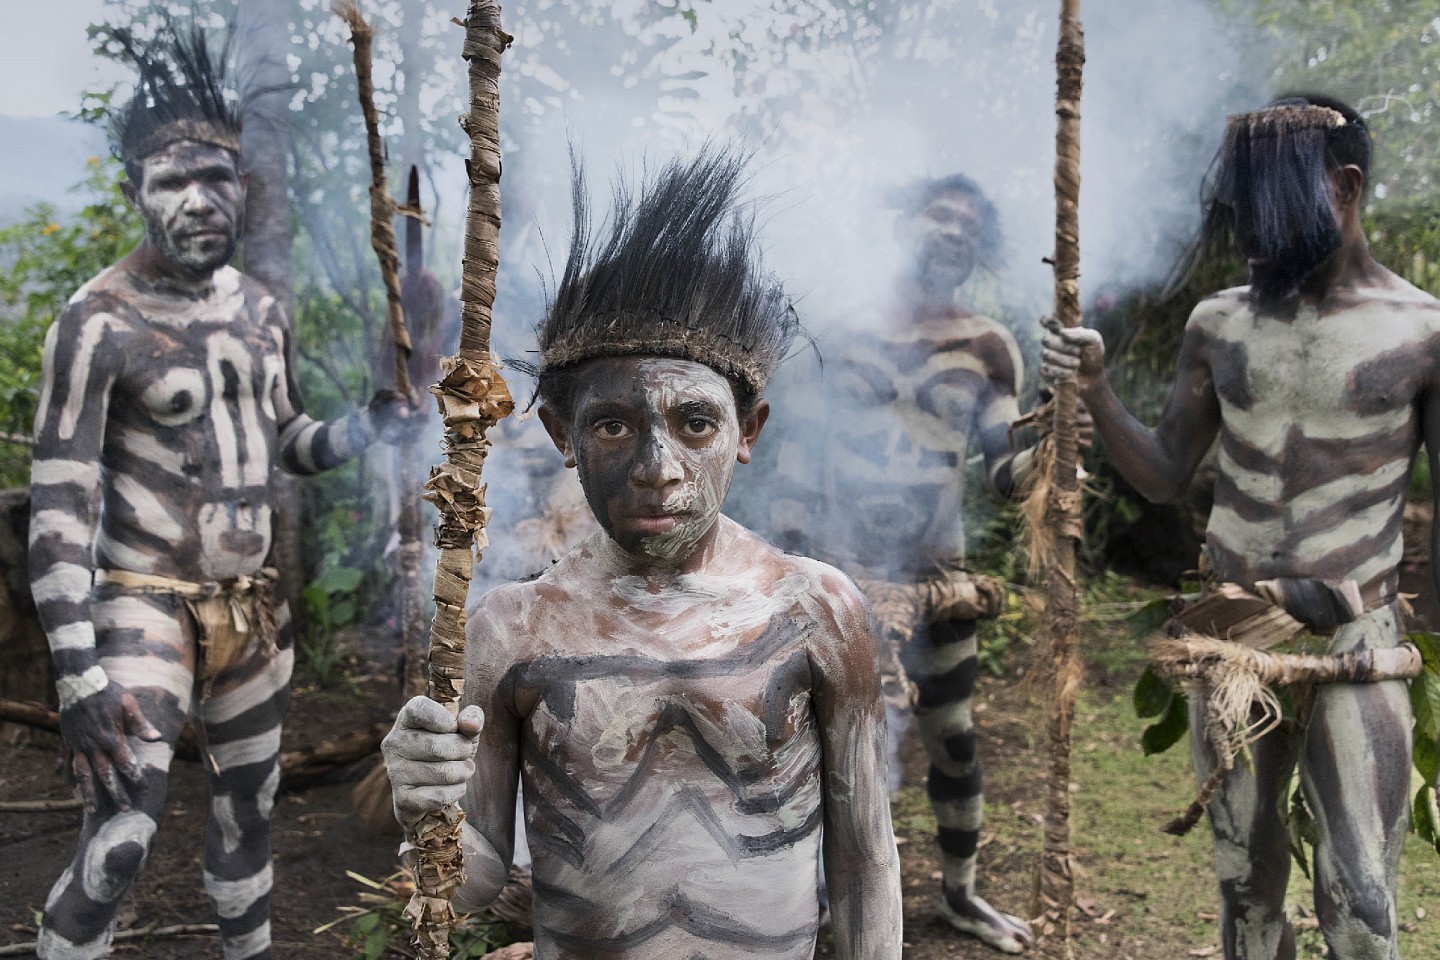 Steve McCurry, Mudmen During Traditional Ceremony, 2017
FujiFlex Crystal Archive Print
Price/Size on request